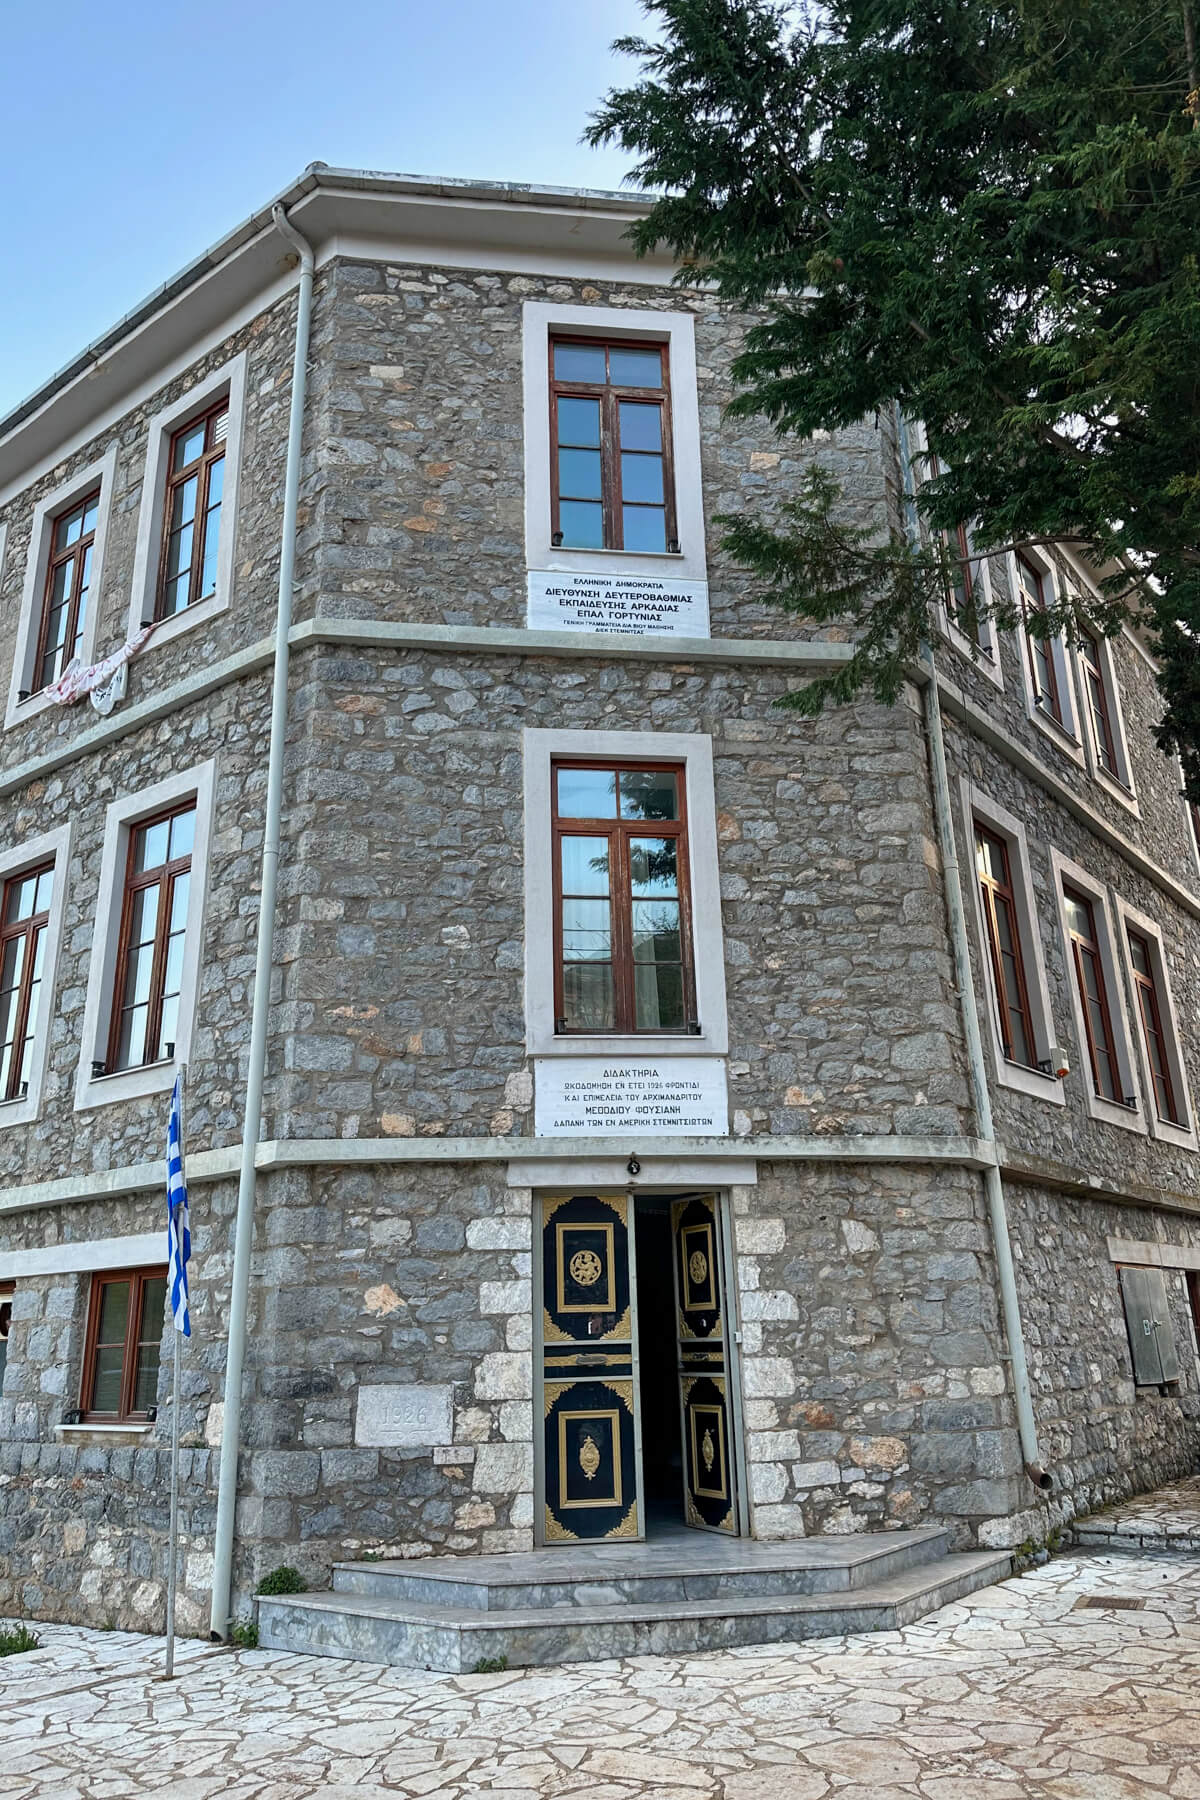 The front of the stone building, the Silver Goldsmithery School in Stemnitsa